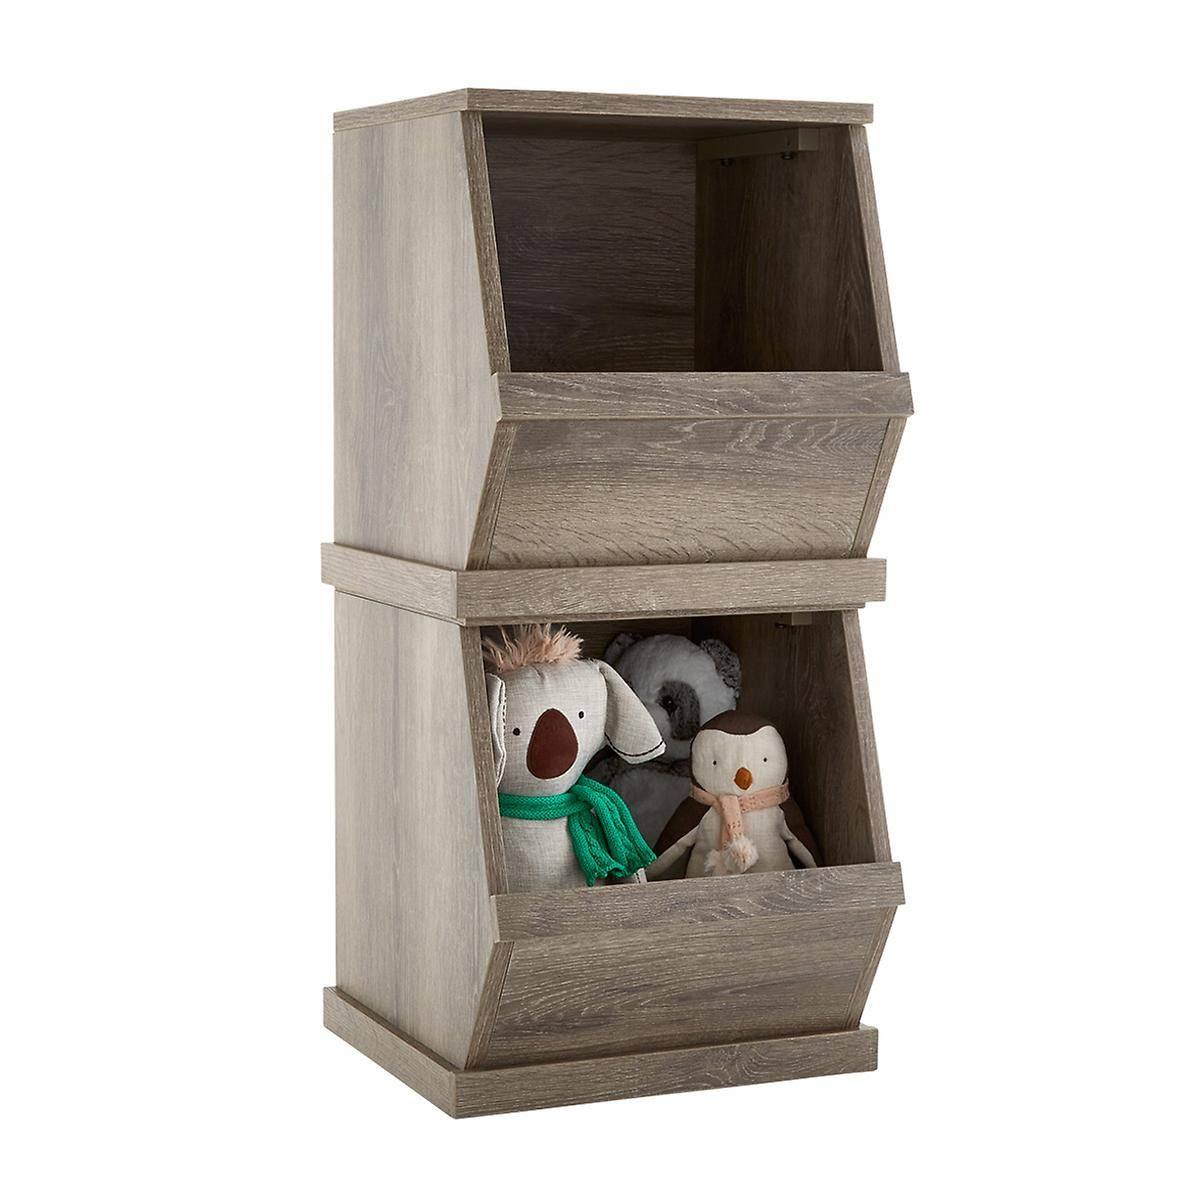 Rustic Driftwood Nantucket Single Stackable Storage Bin House throughout size 1200 X 1200